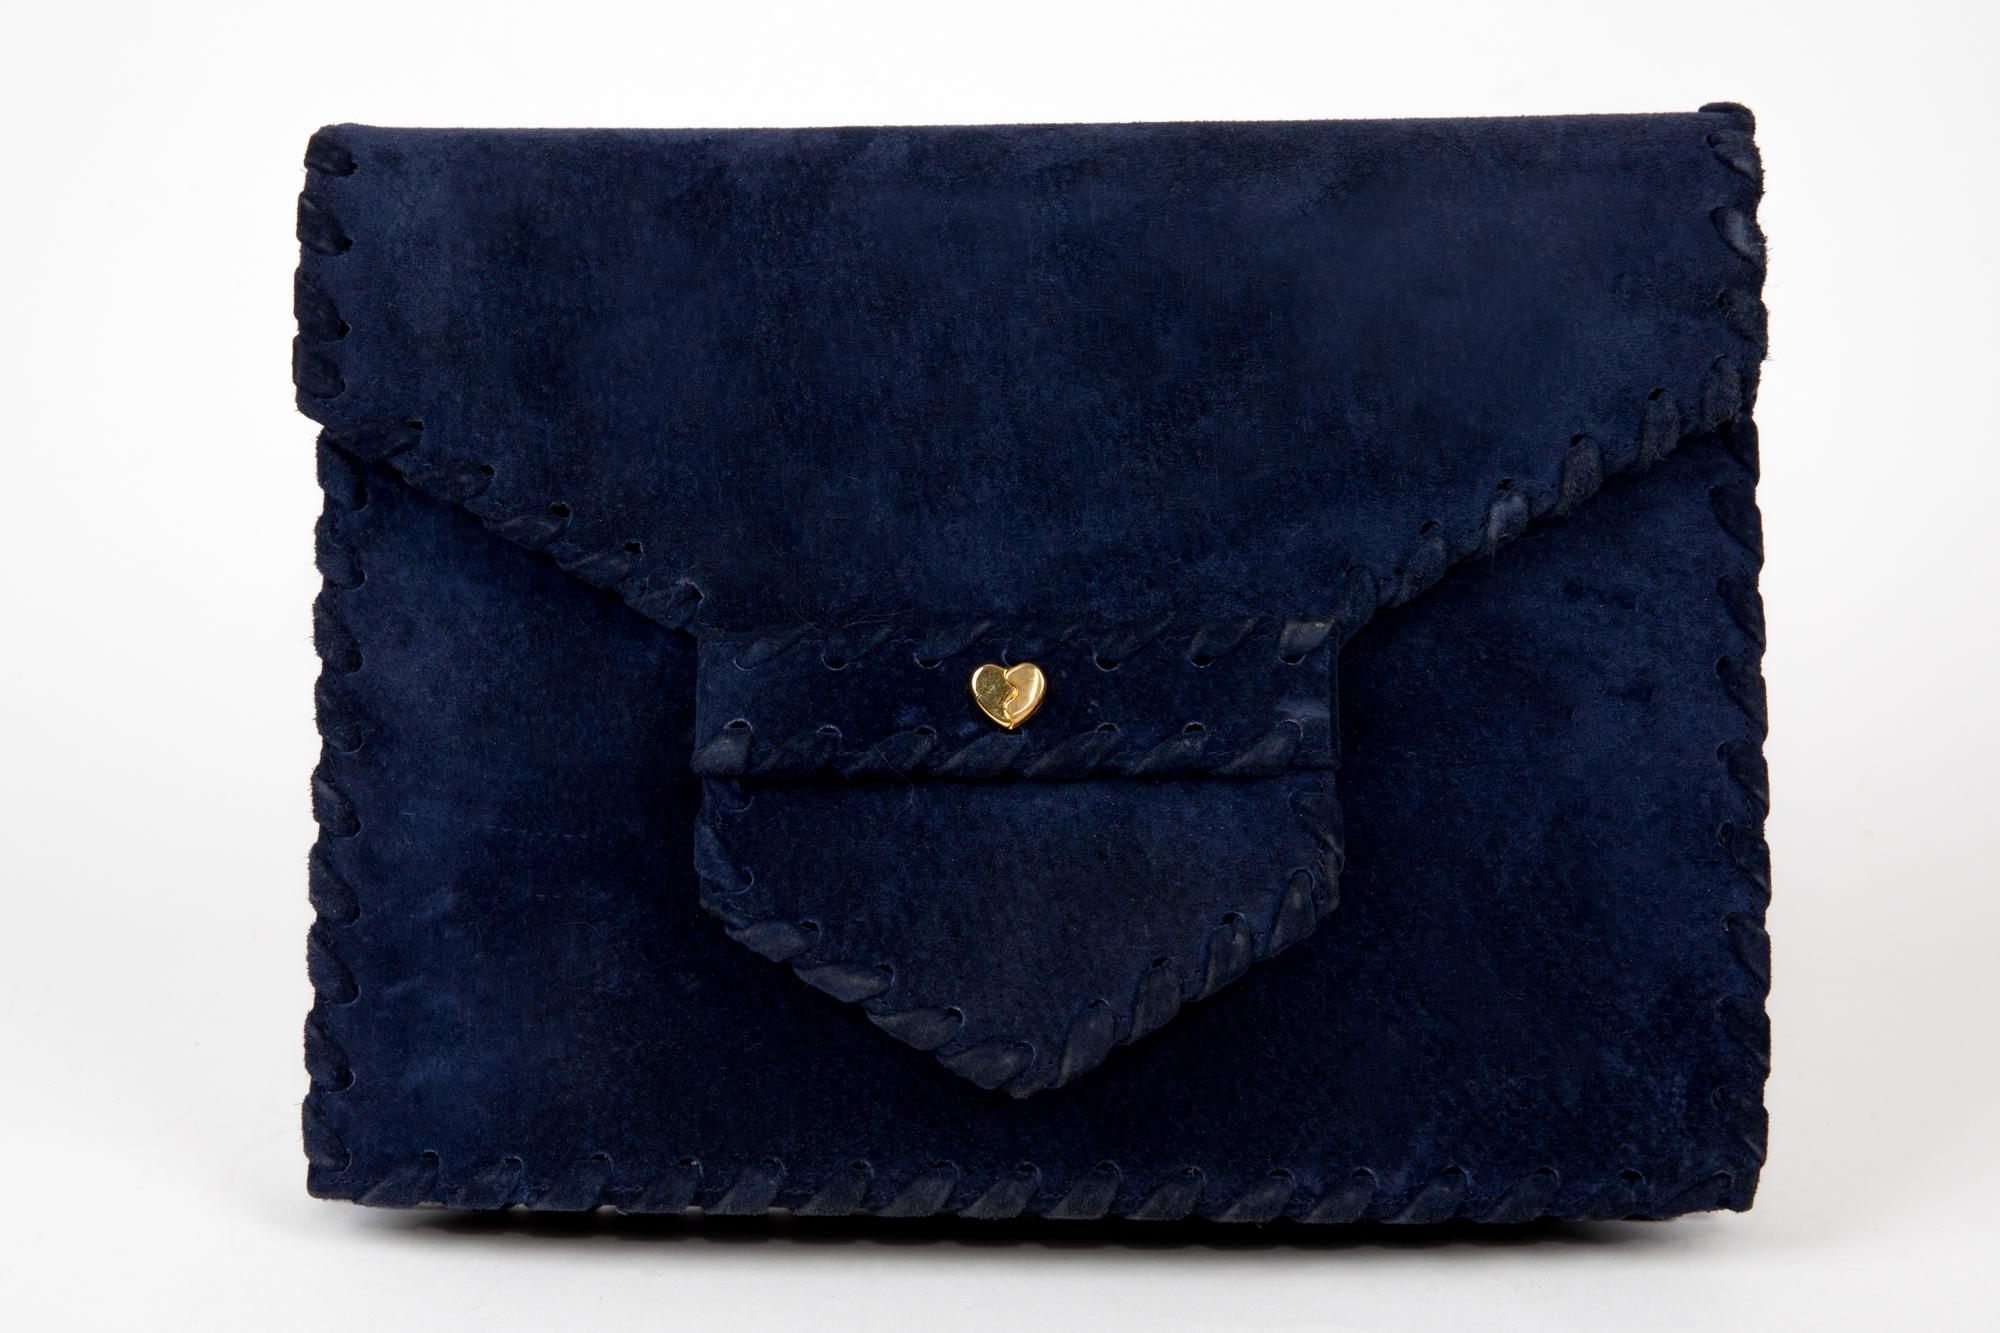 Sepcoeur Blue Suede Leather Large Clutch Bag  For Sale 2